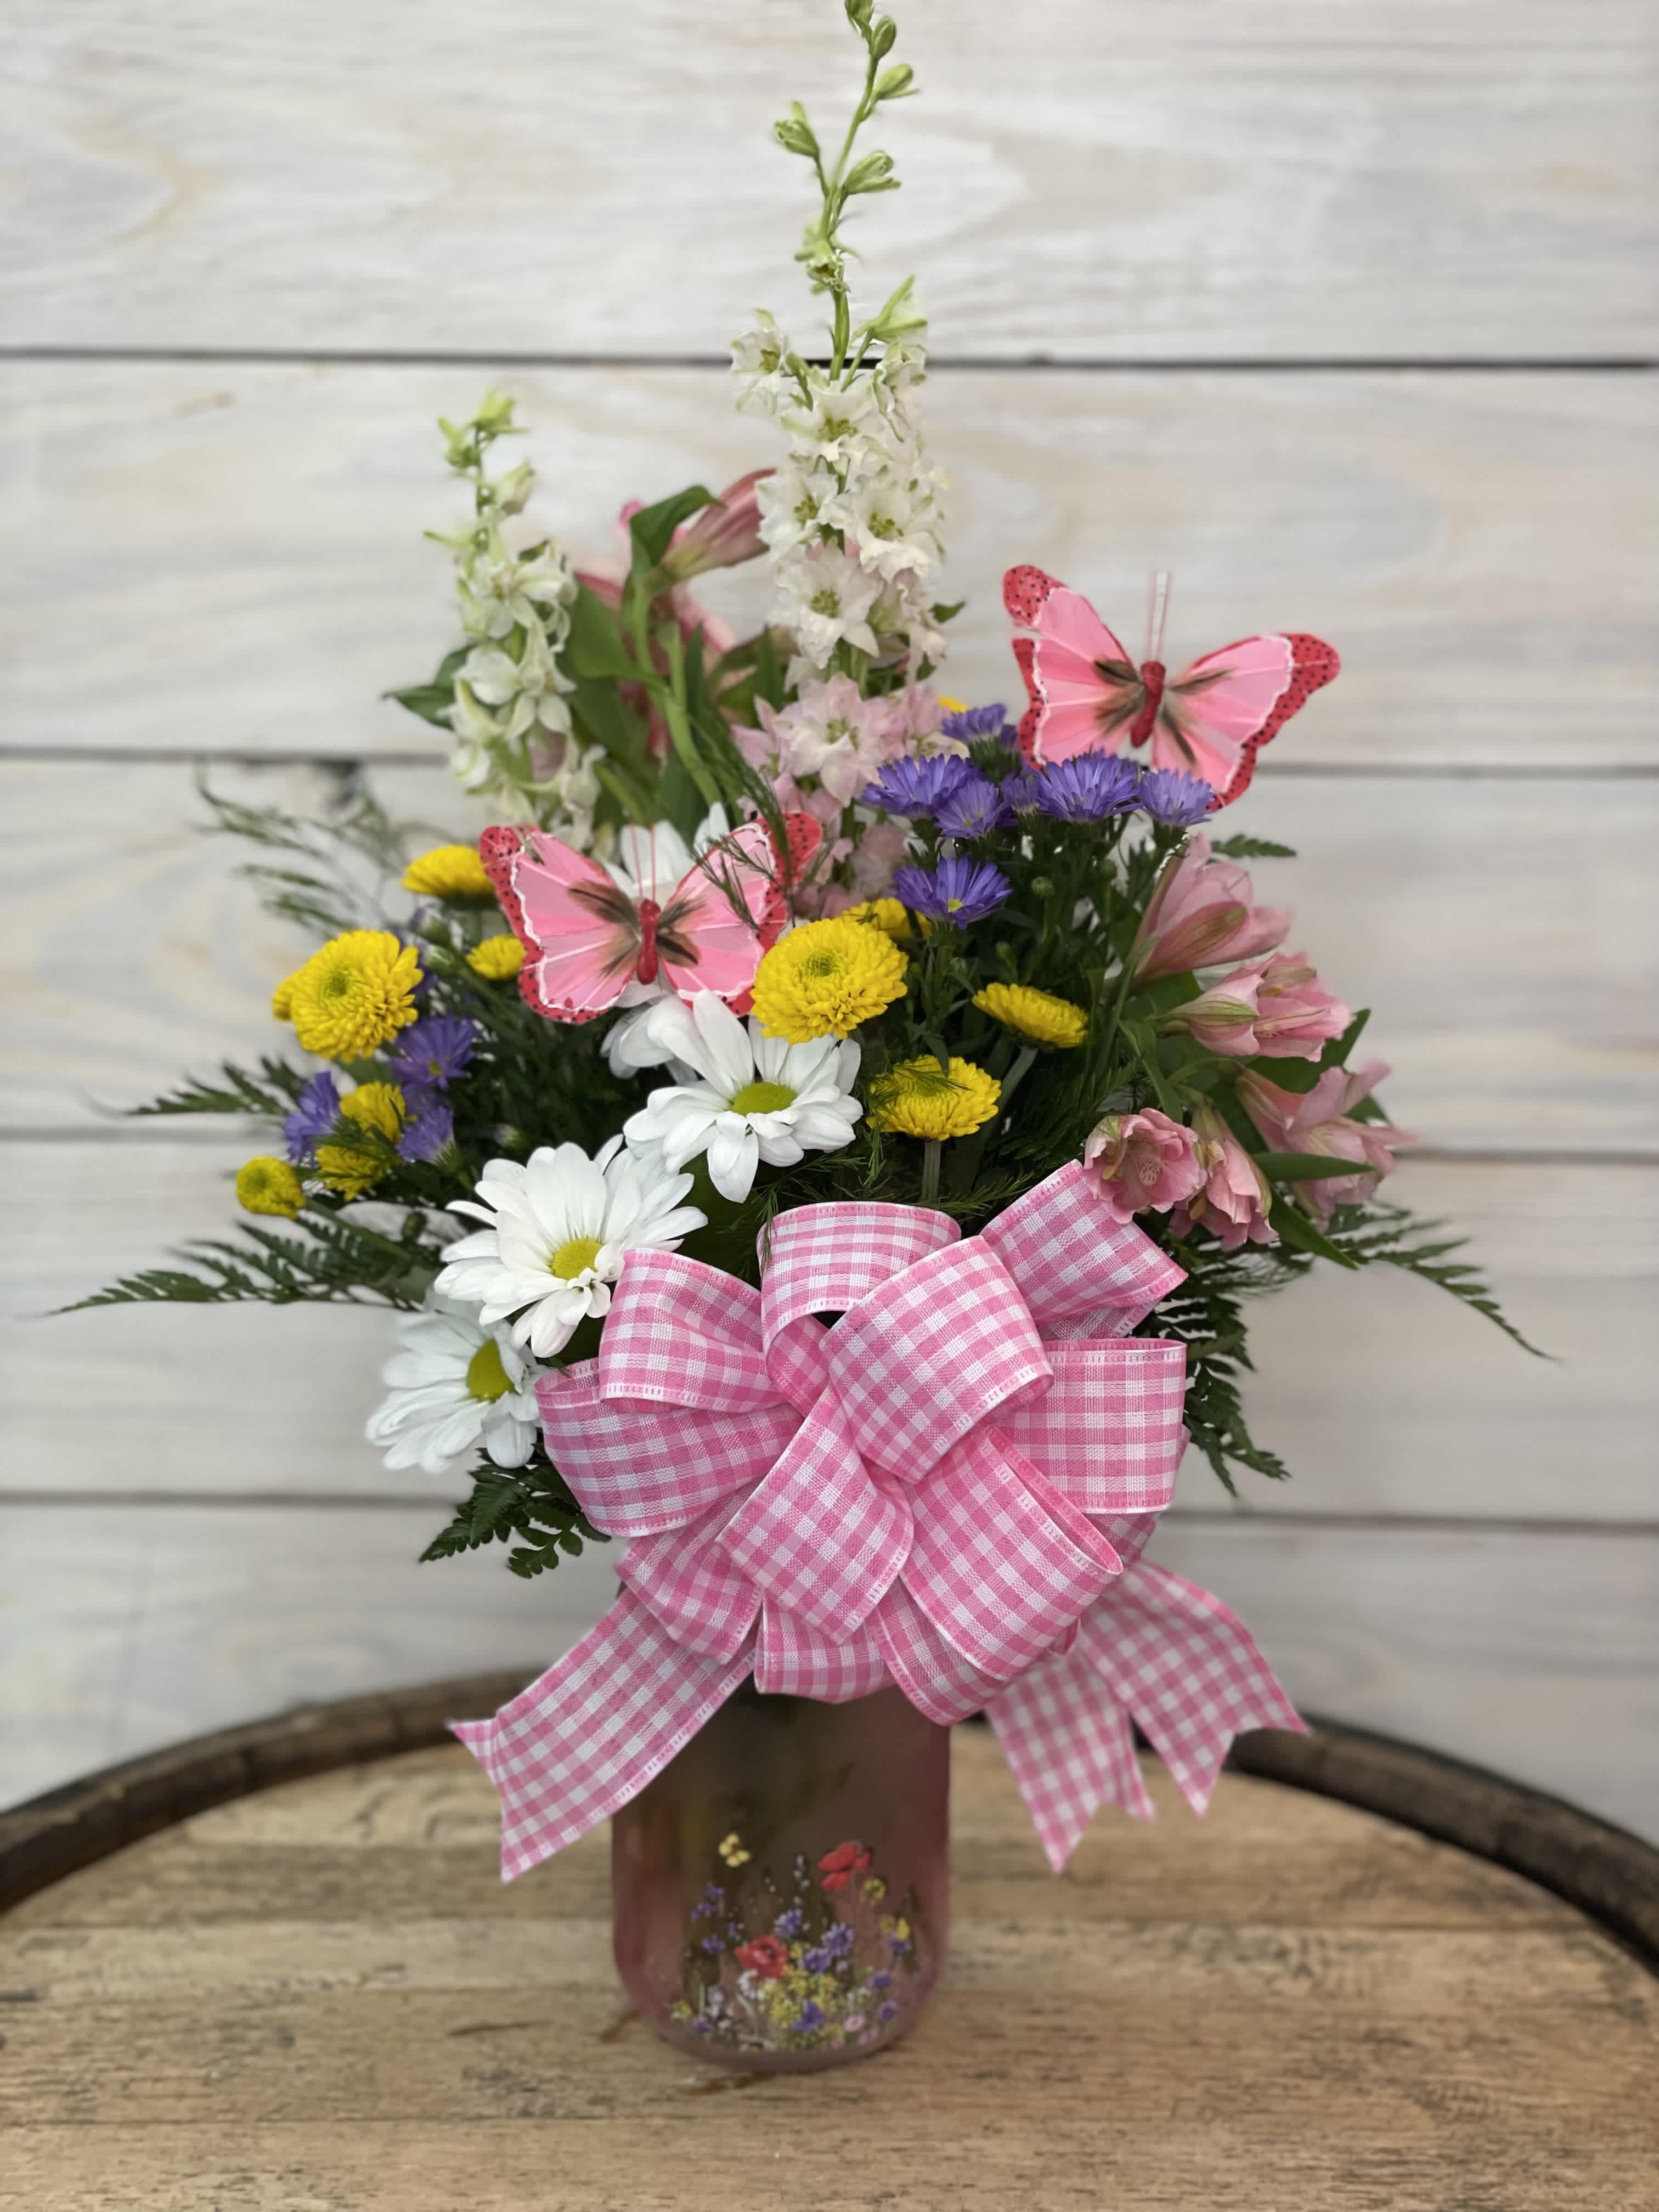 Rosy Picnics - A floral mason jar filled with fresh, spring blossoms